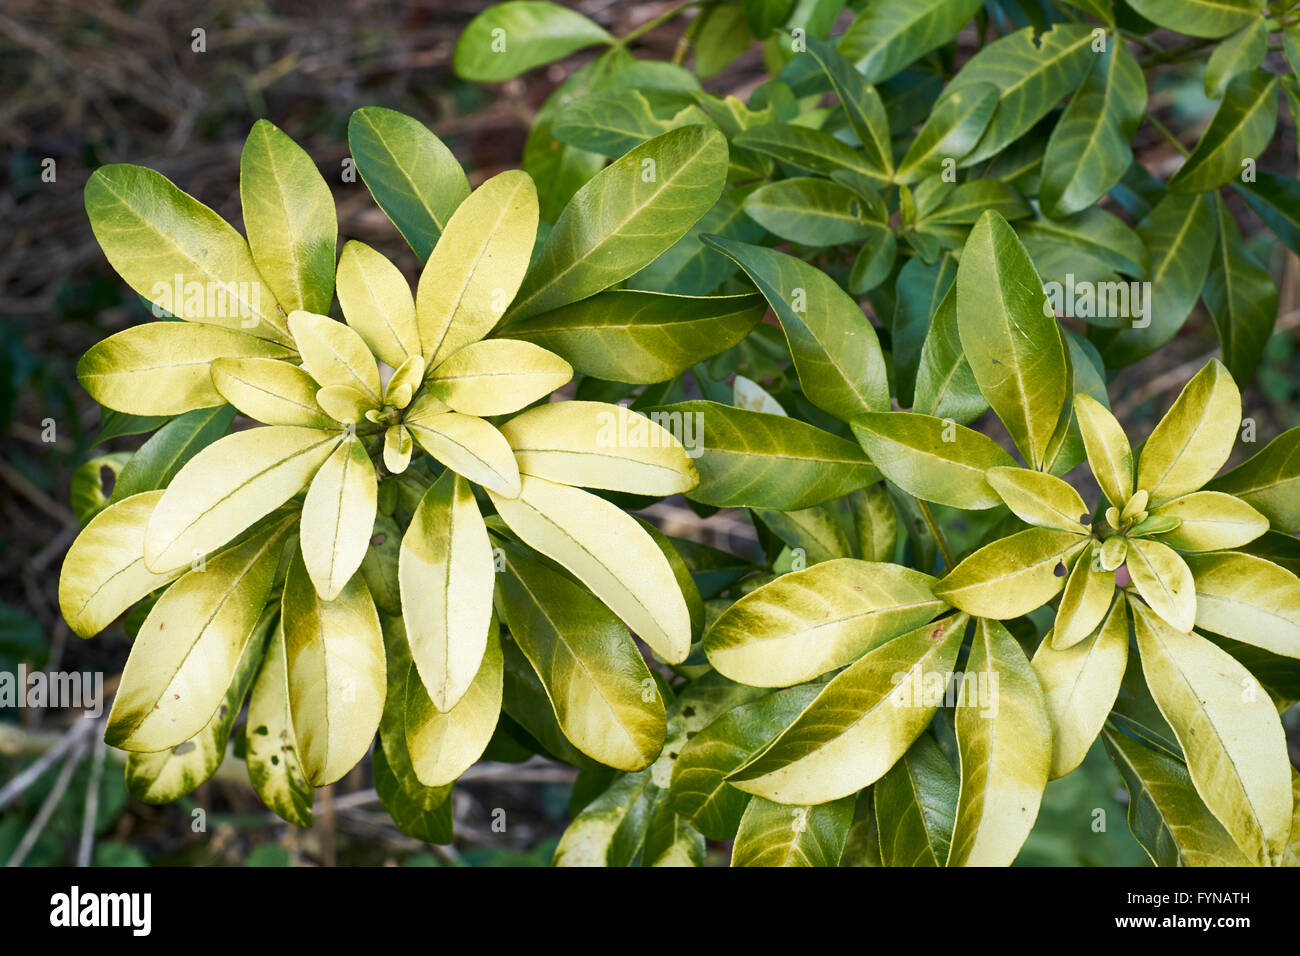 A Choisya plant growing in a Spring garden flowerbed. UK. Stock Photo